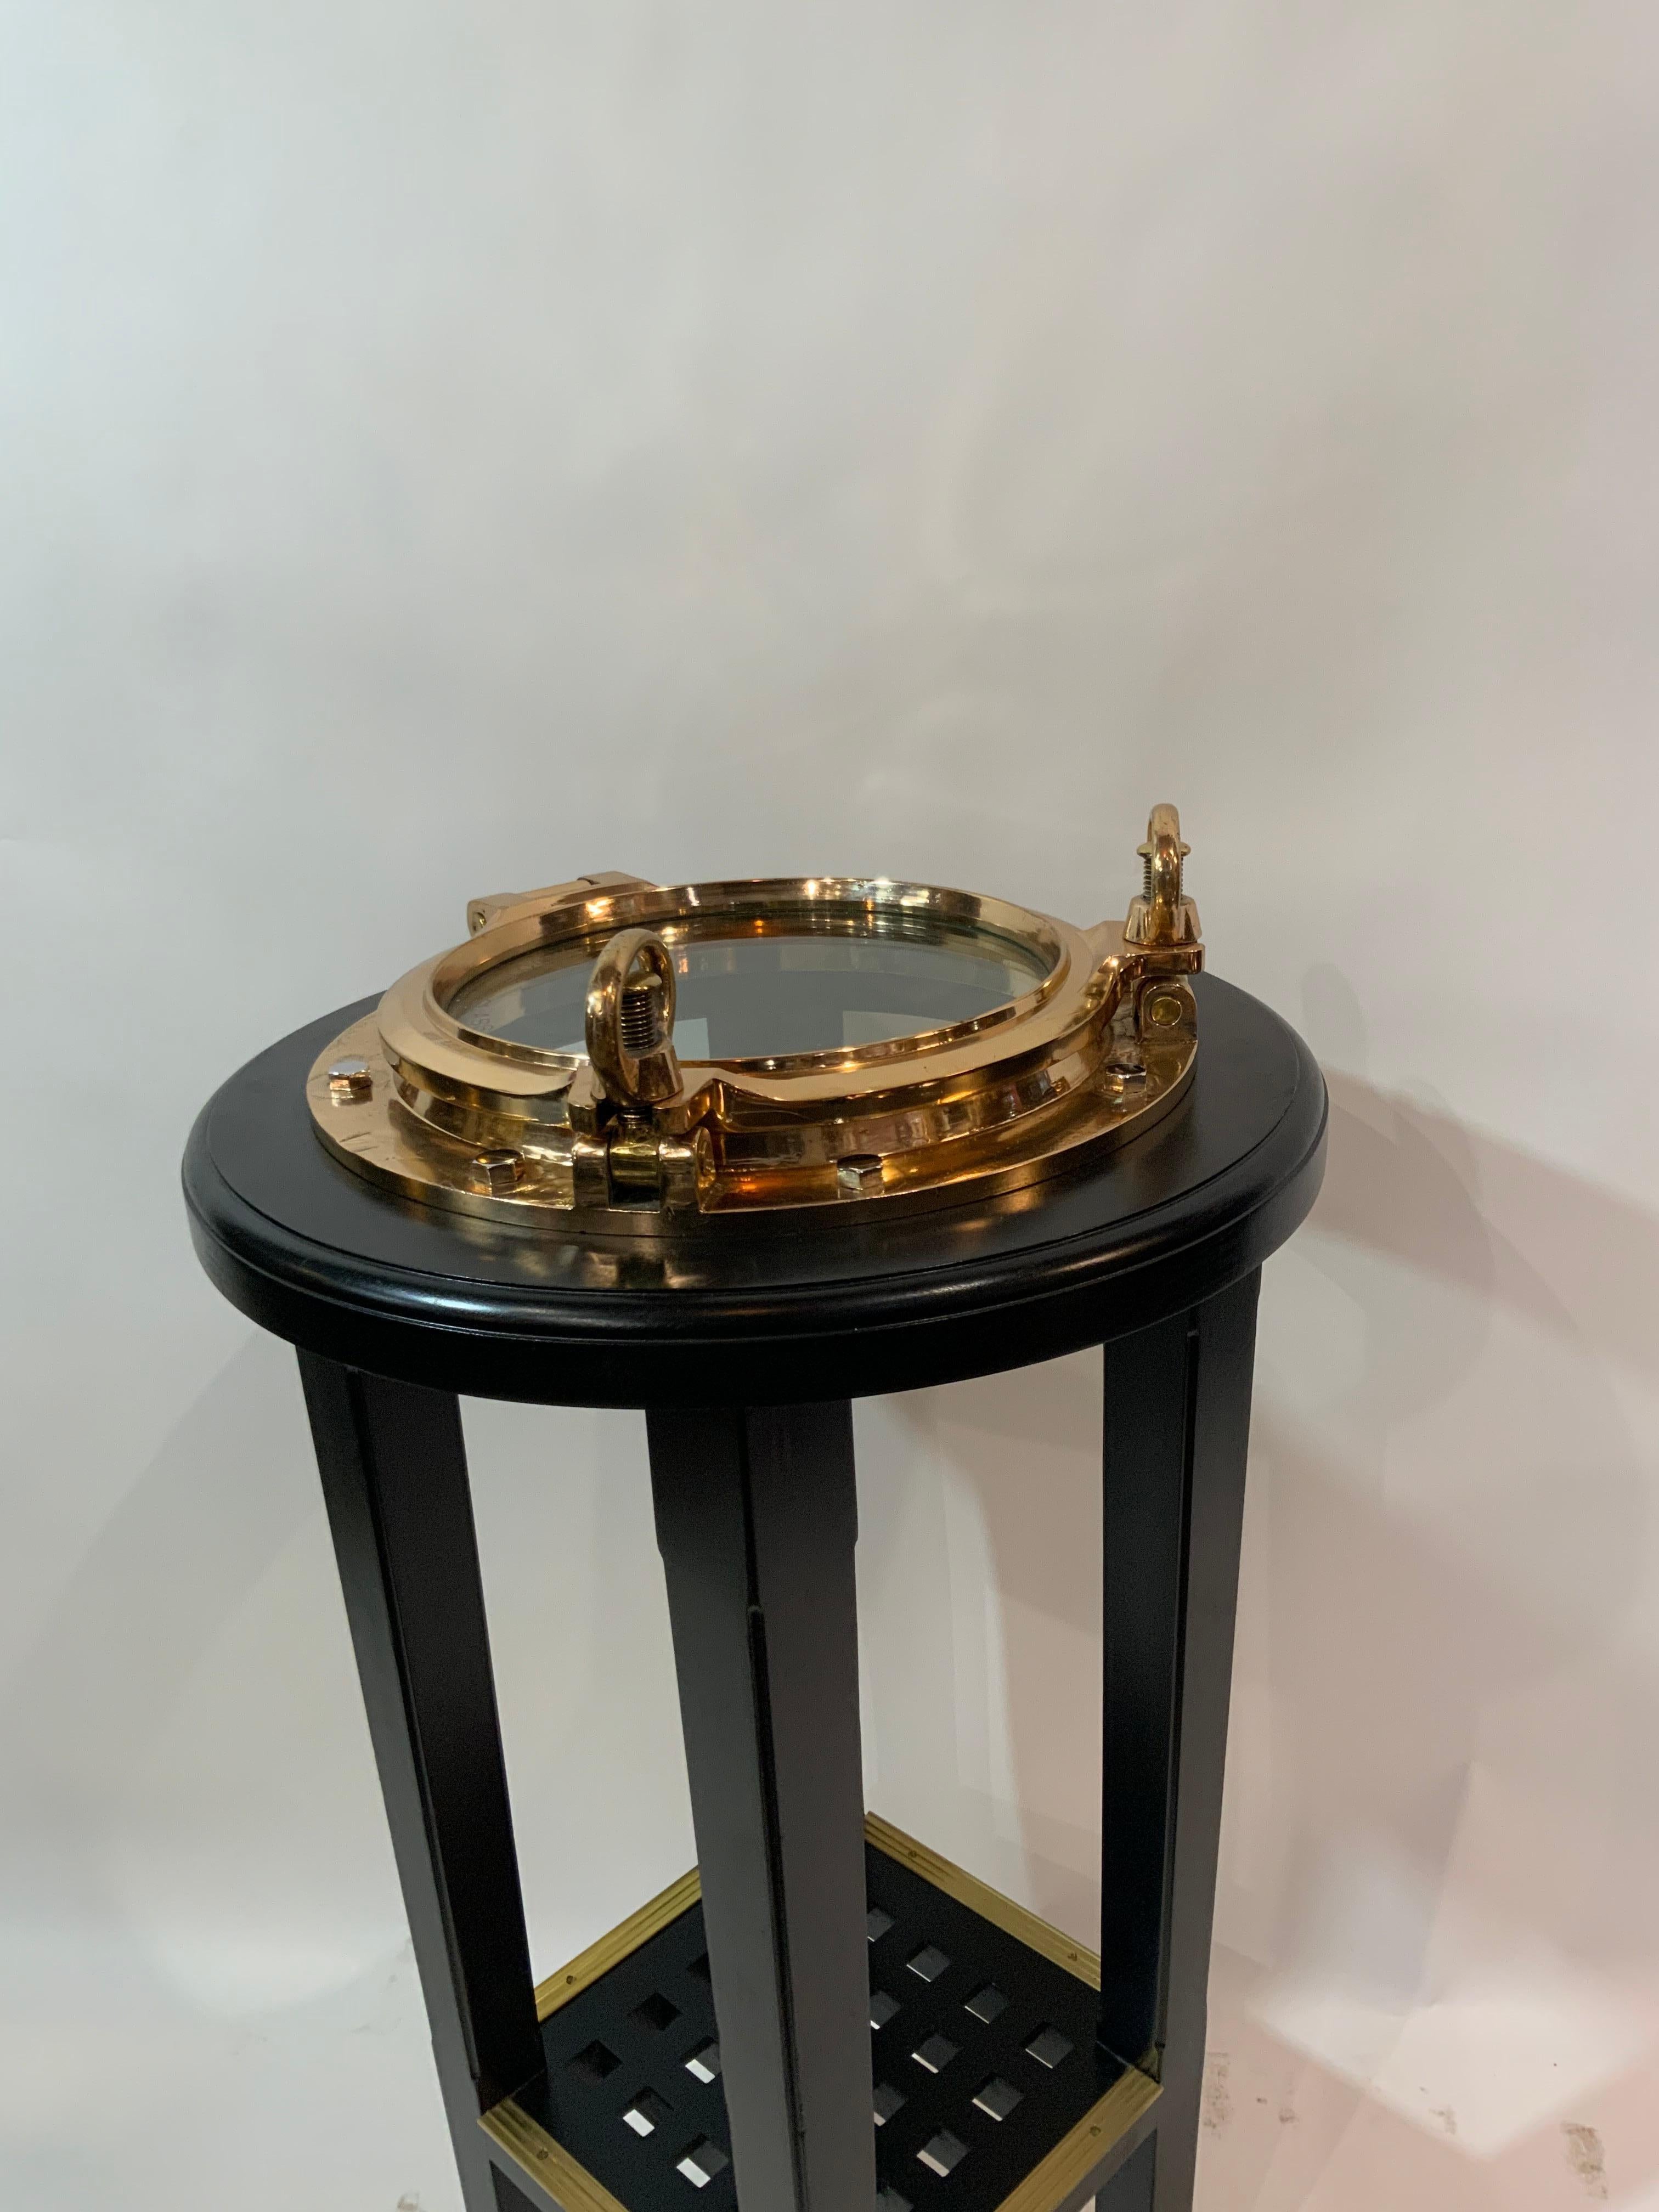 Solid Brass Ships Porthole Table In Excellent Condition For Sale In Norwell, MA